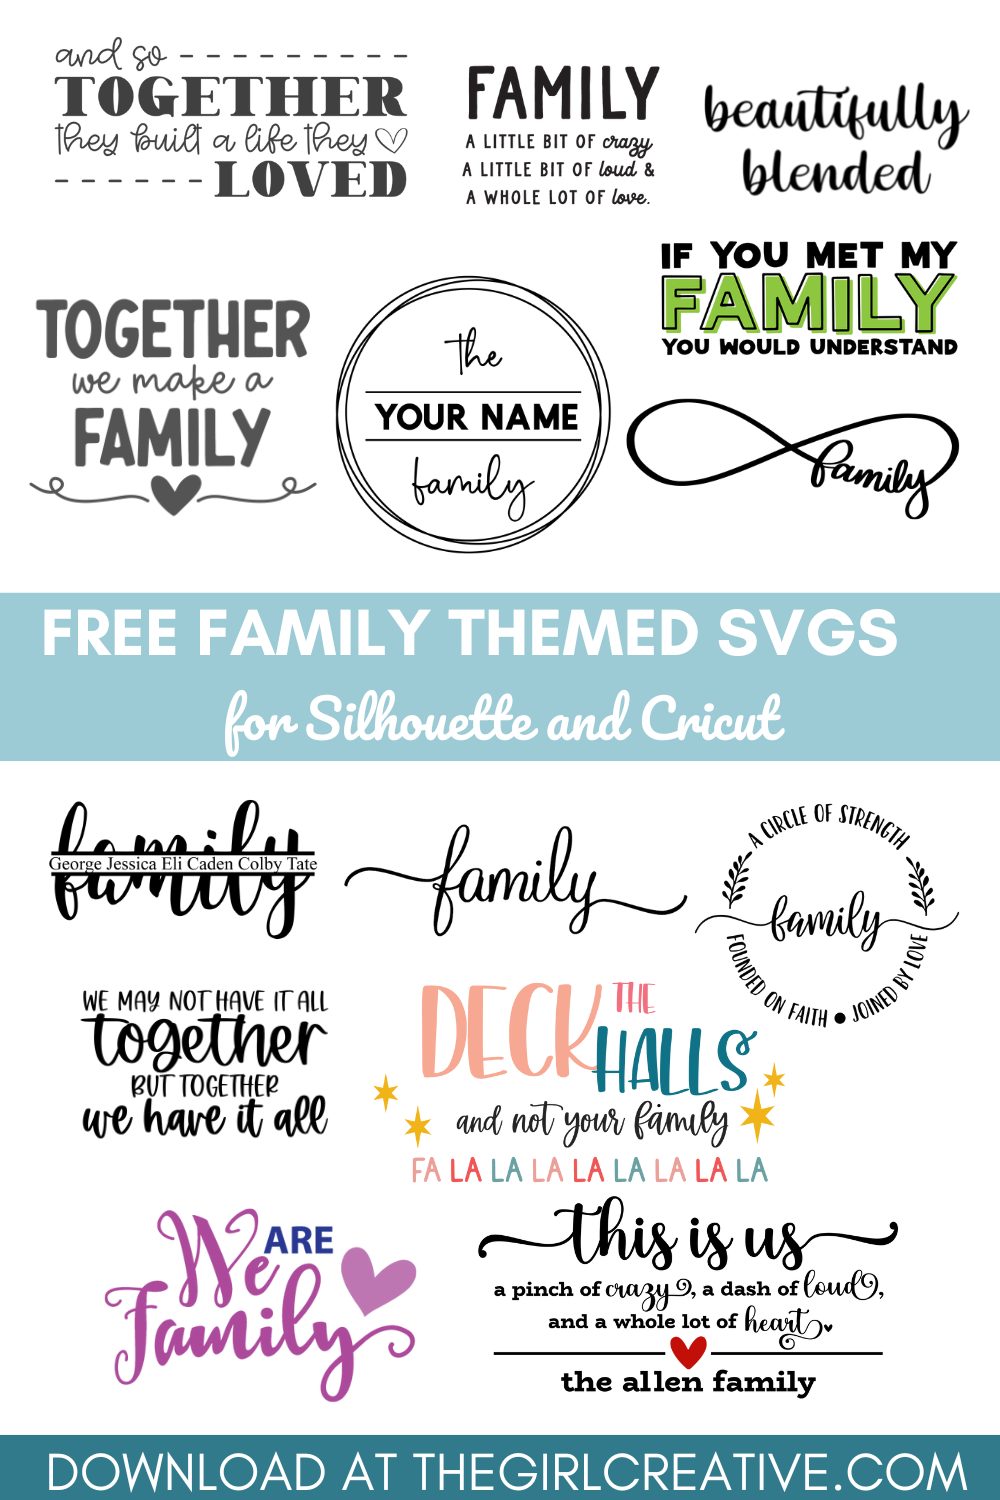 Collage of Family themed svgs